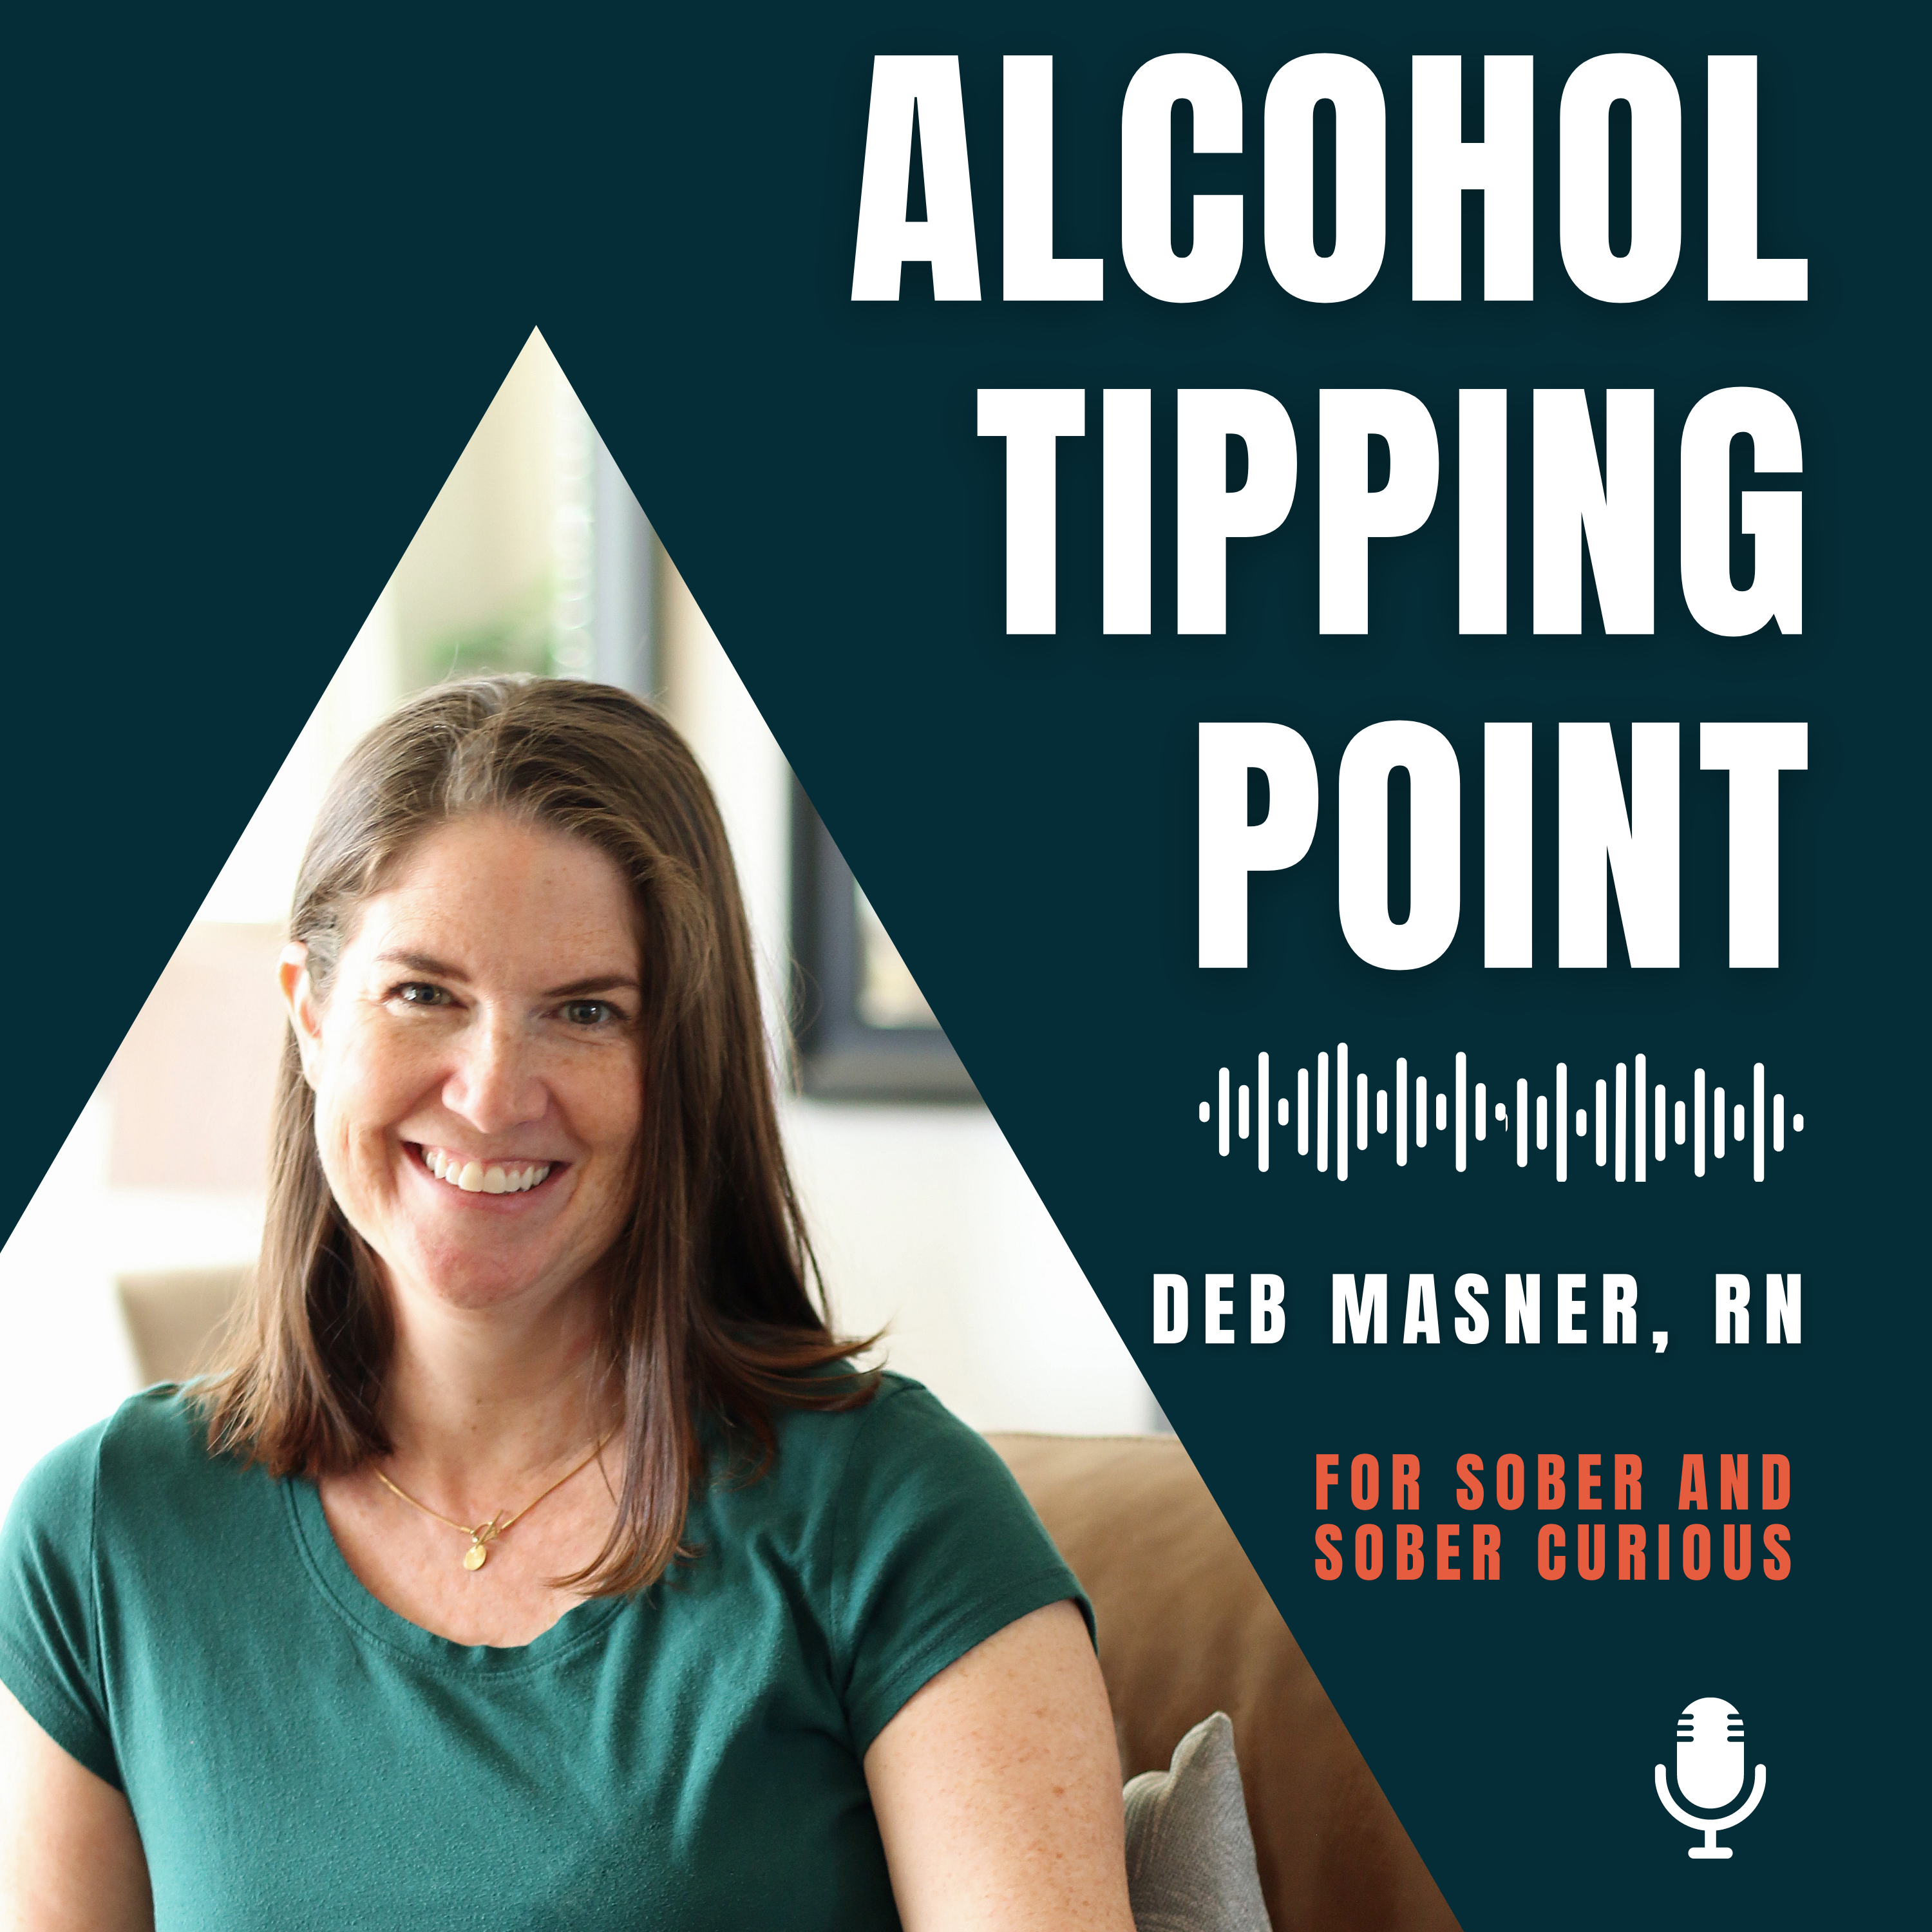 What is Gray Area Drinking? Interview with Sarah Rusbatch